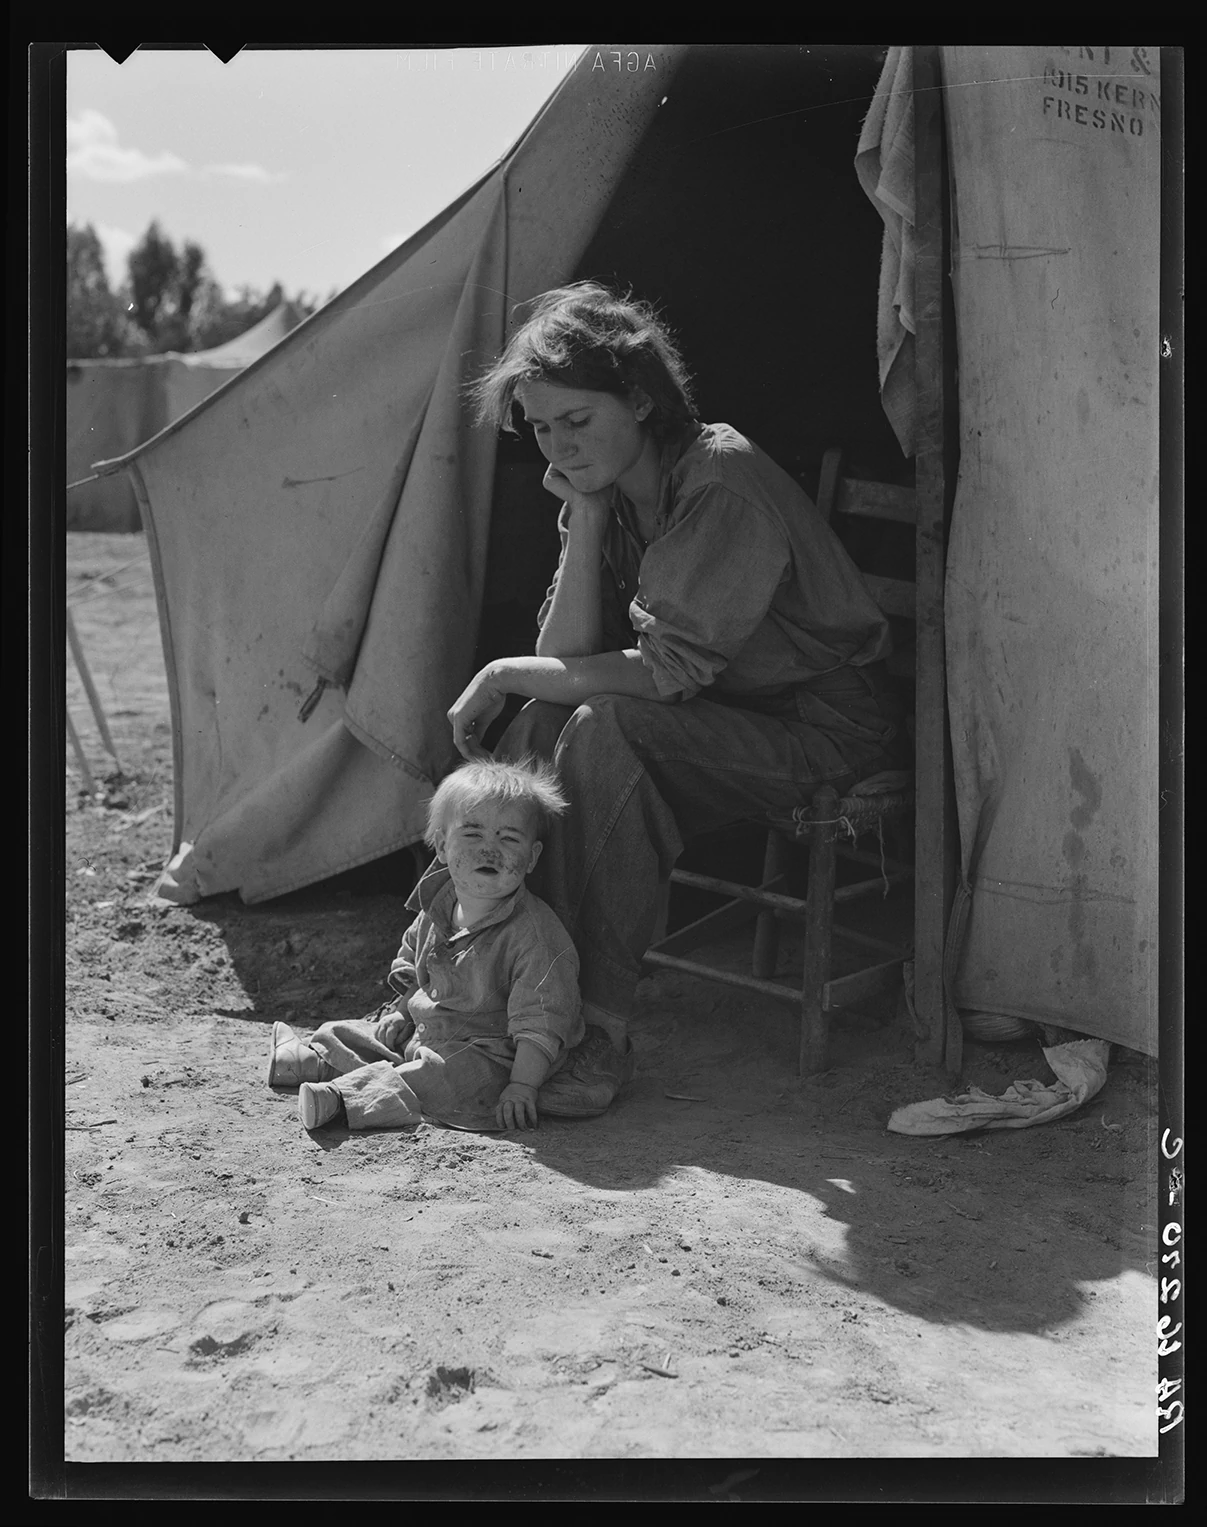 Eighteen year-old mother from Oklahoma, now a California migrant, Dorothea Lange